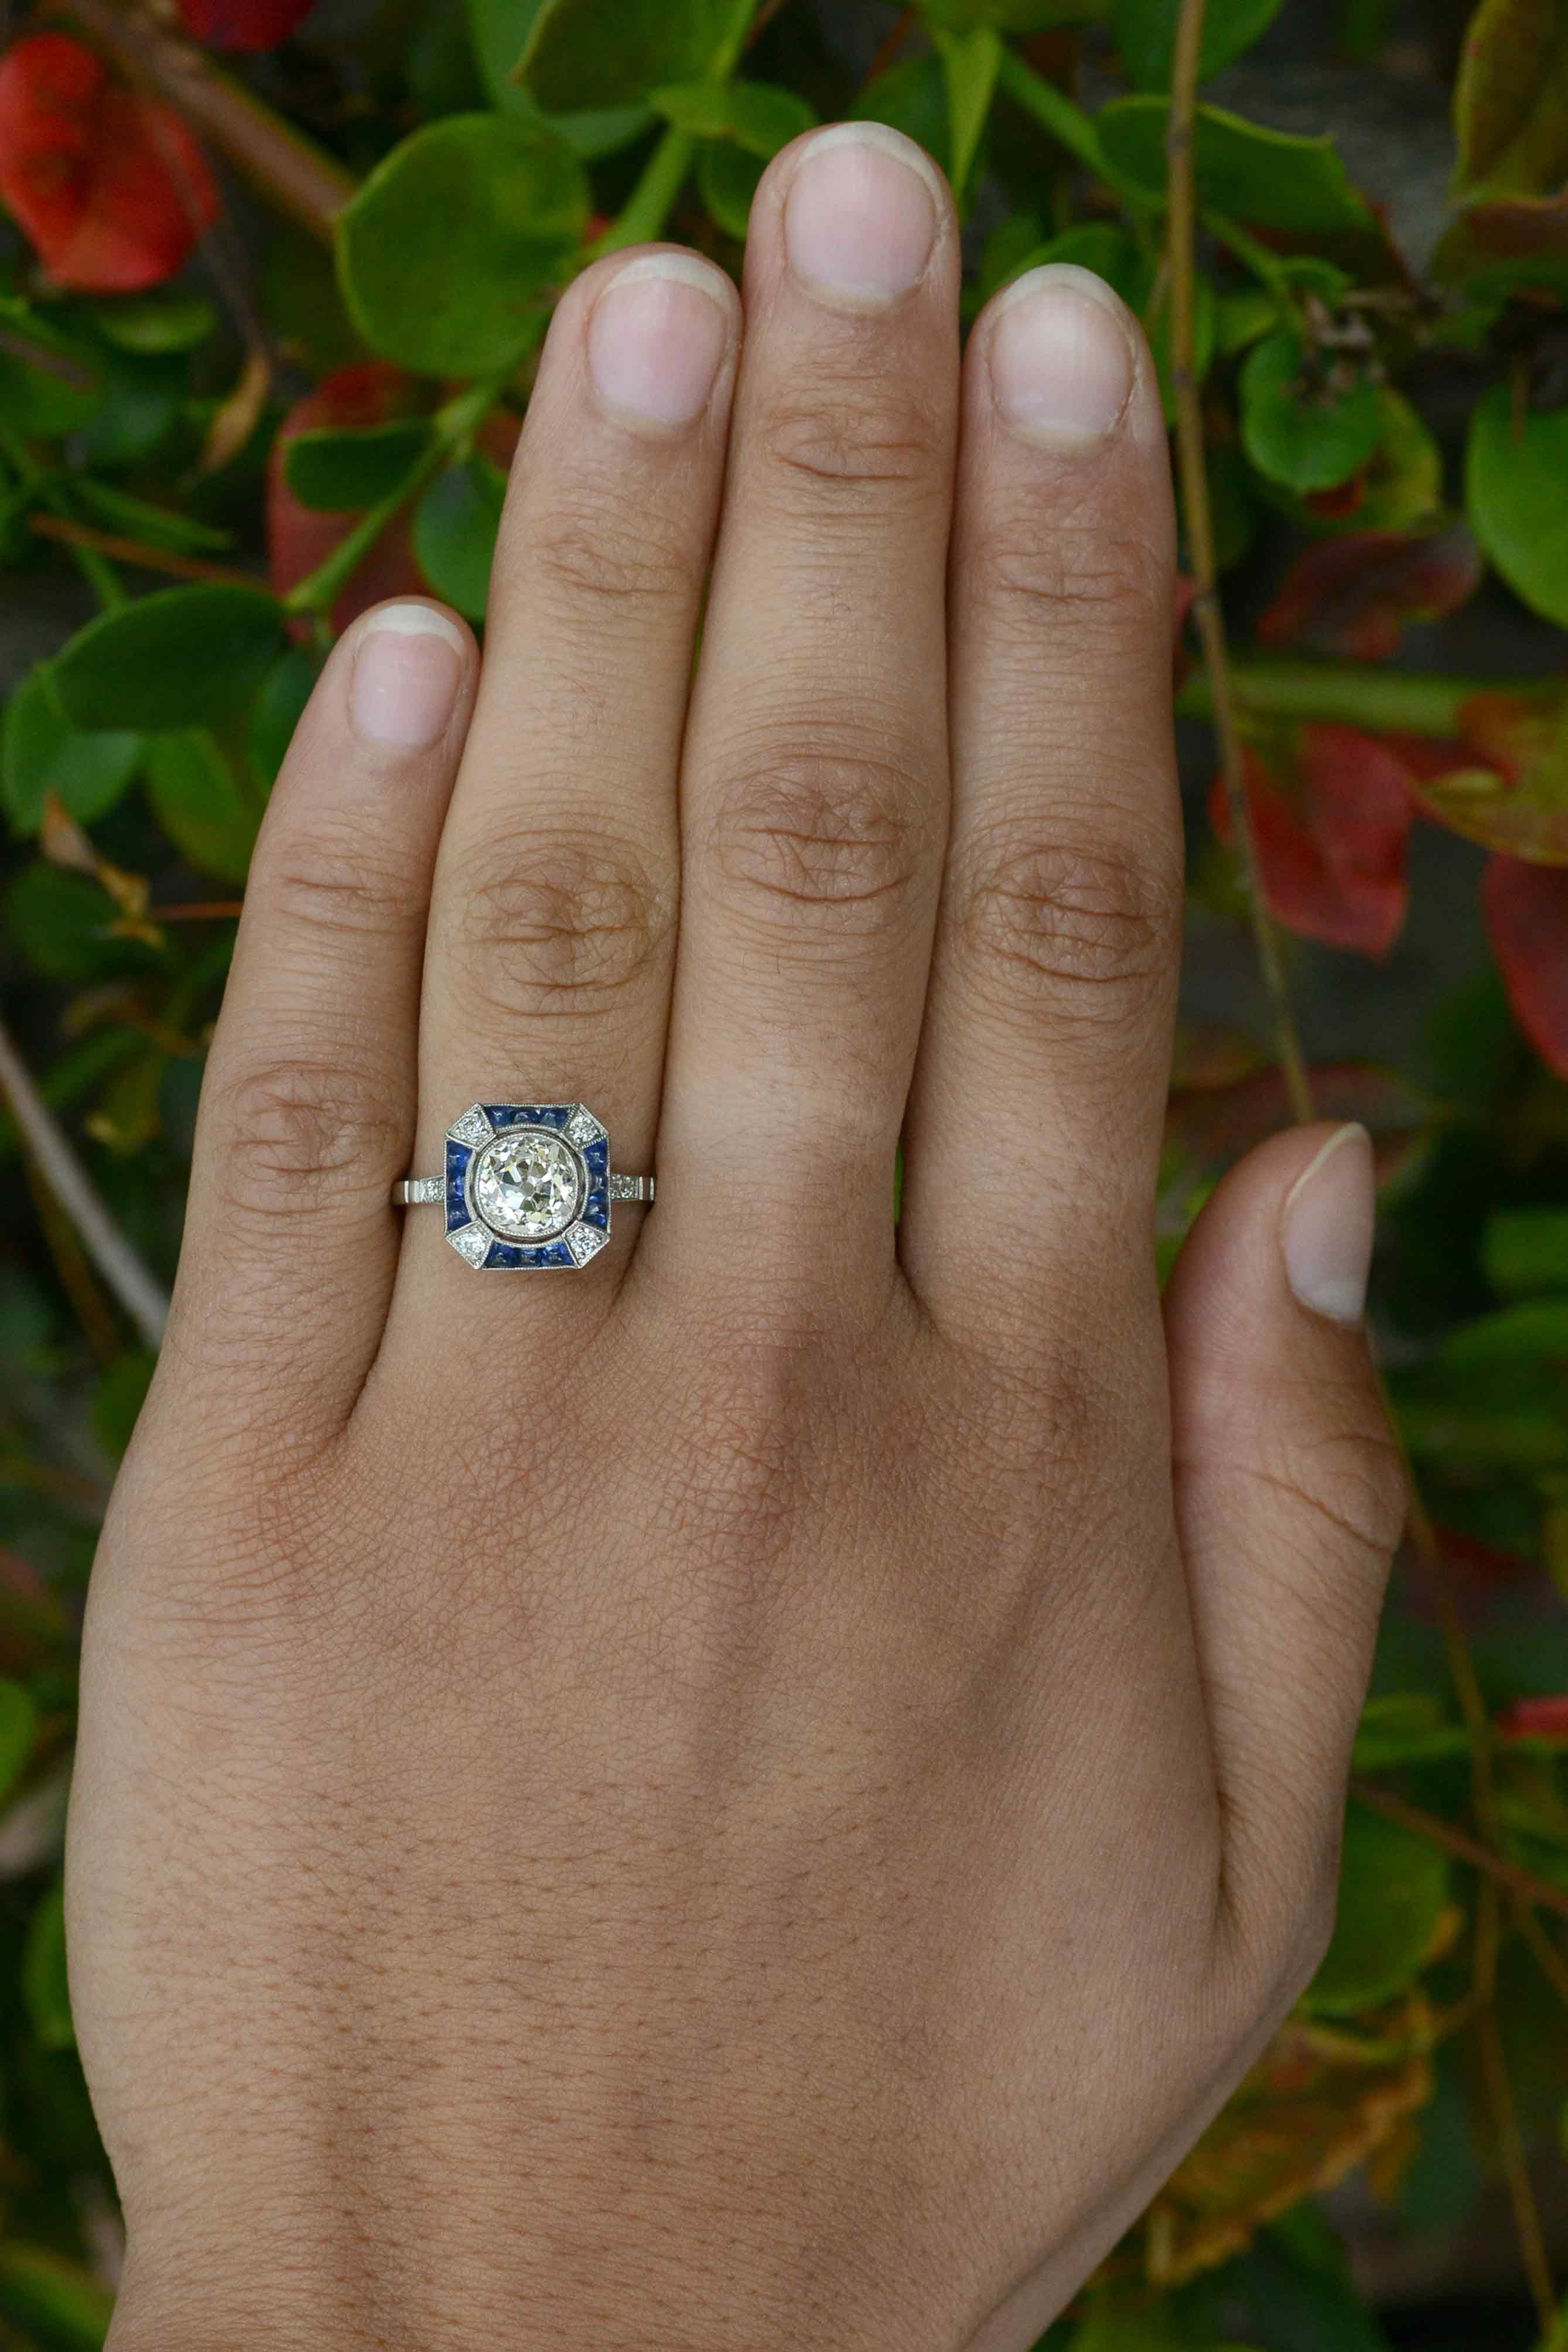 A 1.68 carat old mine cut diamond engagement ring that stuns you with a captivating brilliance emanating from the large facets which were hand-cut to reflect candlelight. Crafted in the spirit of an Art Deco engagement ring, we rescued this old,